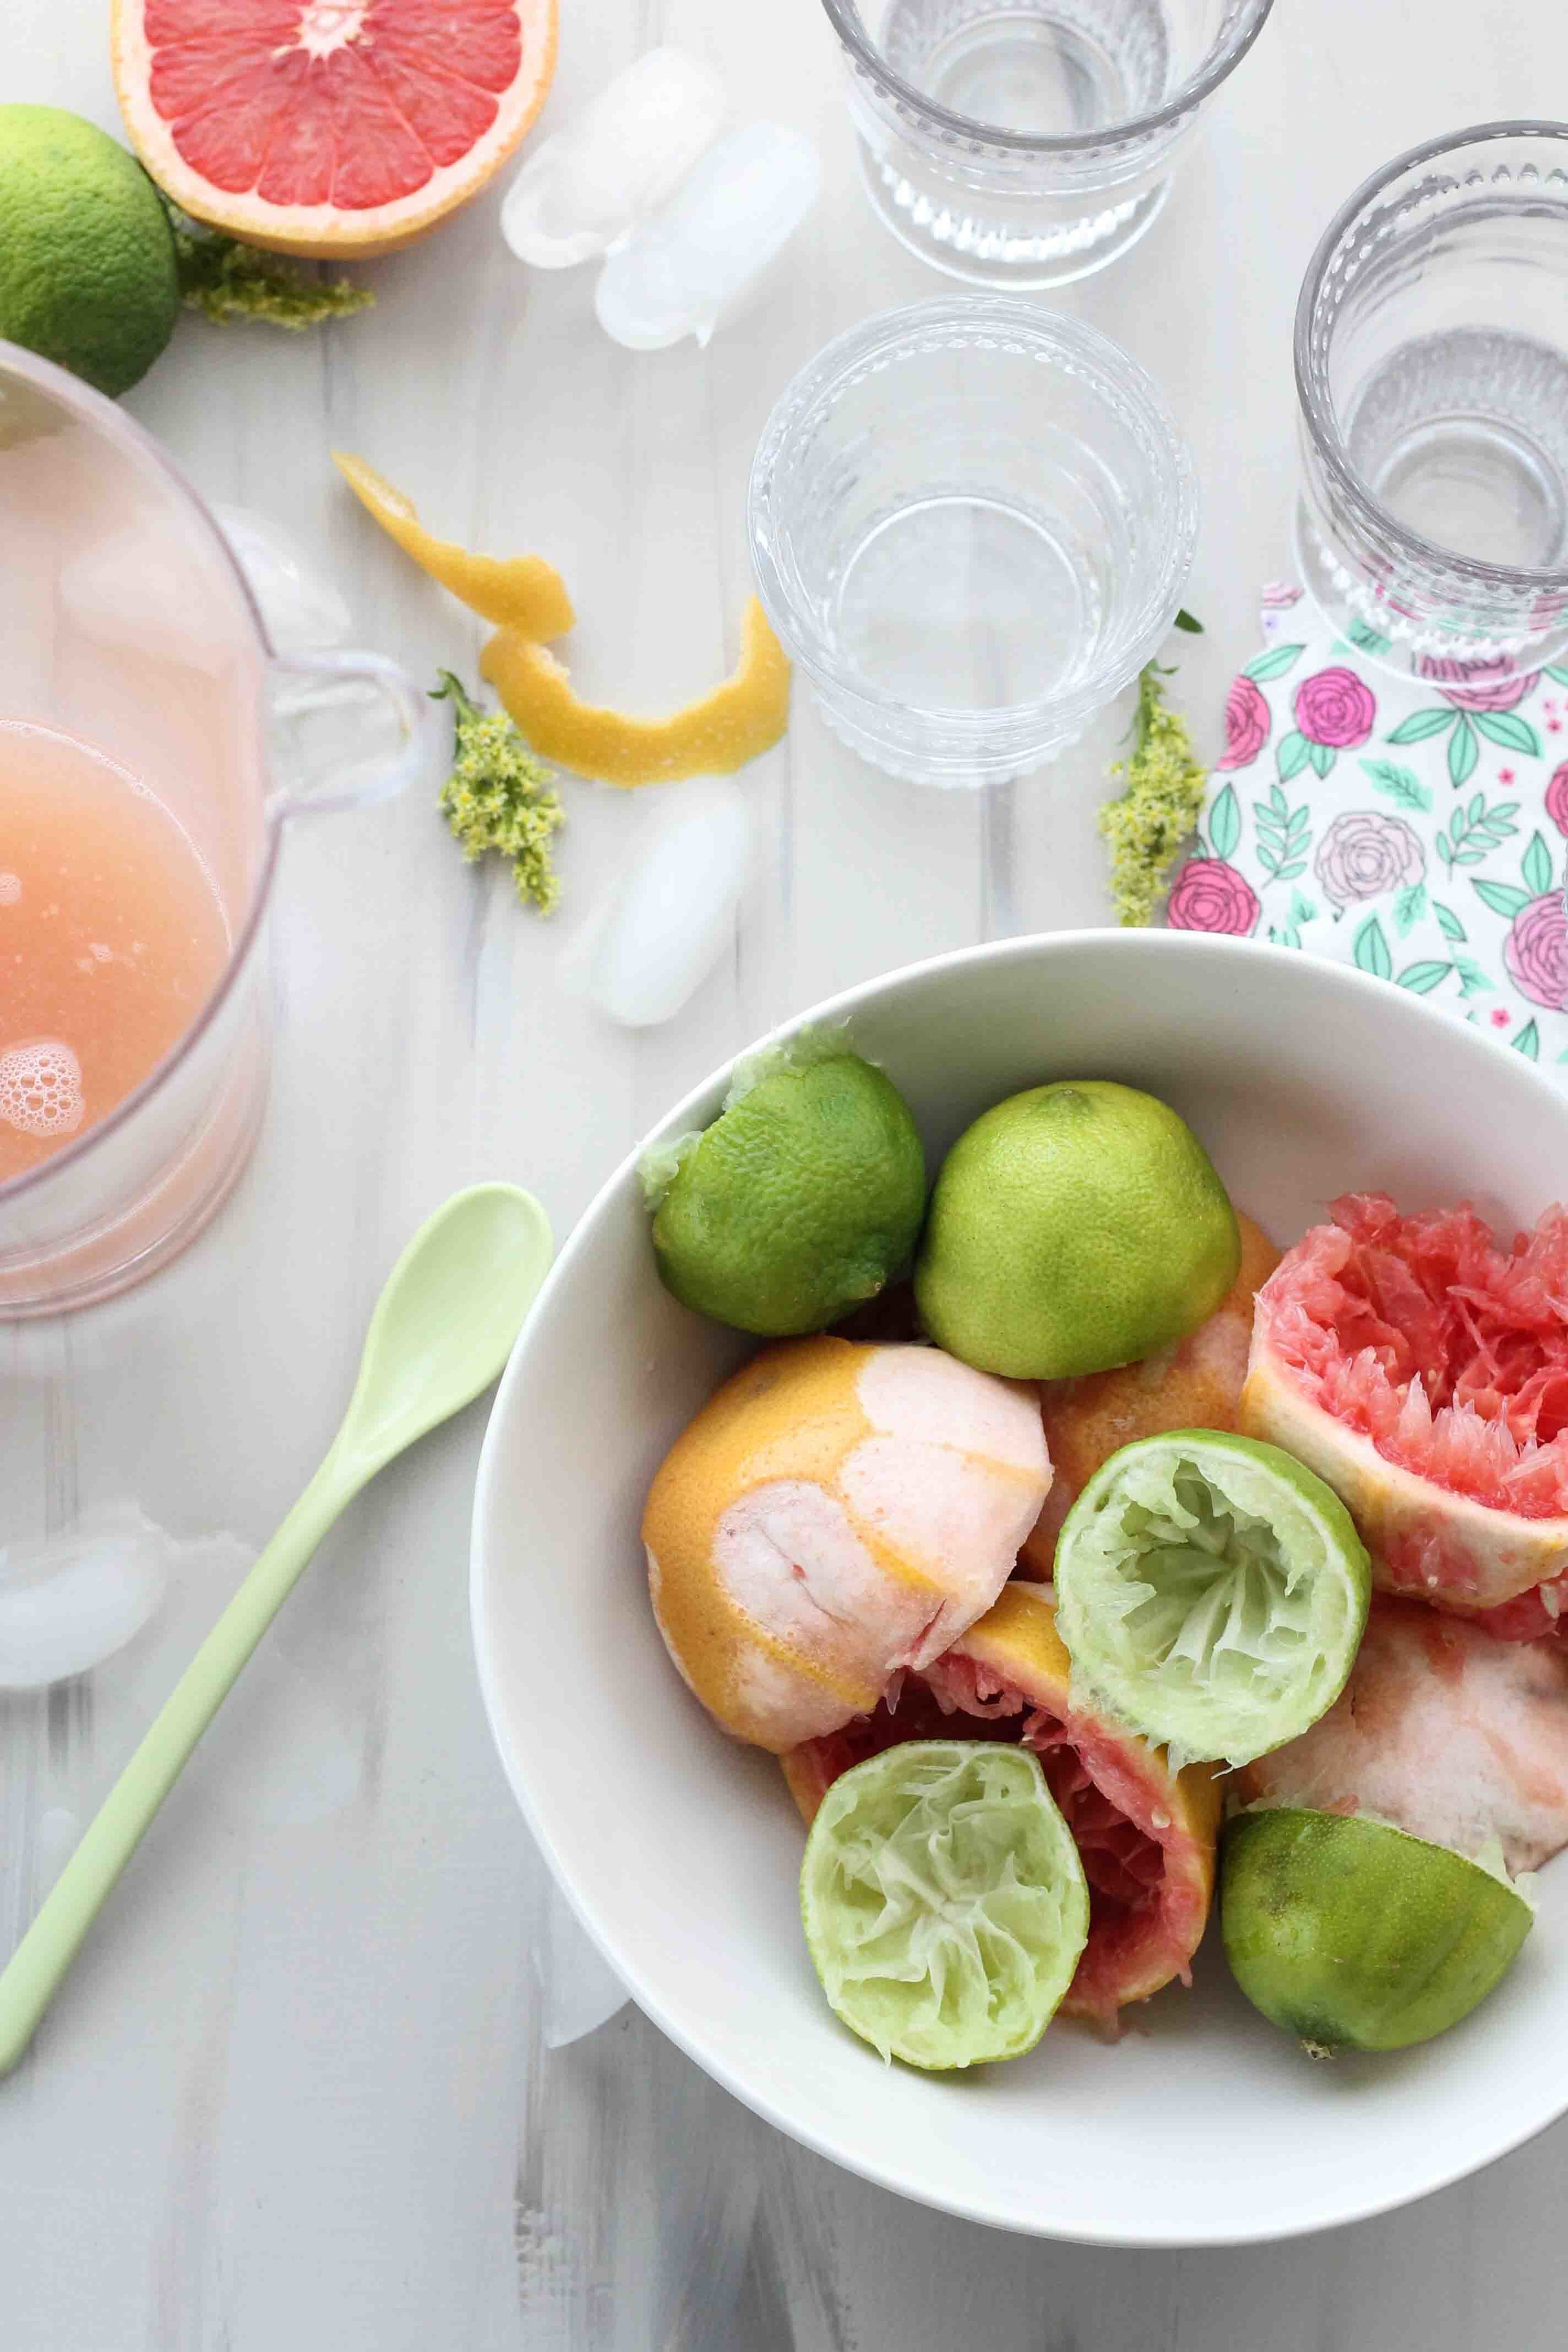 This sparkling grapefruit limeade is the perfect way to celebrate the return of spring! [ www.pedanticfoodie.com ]